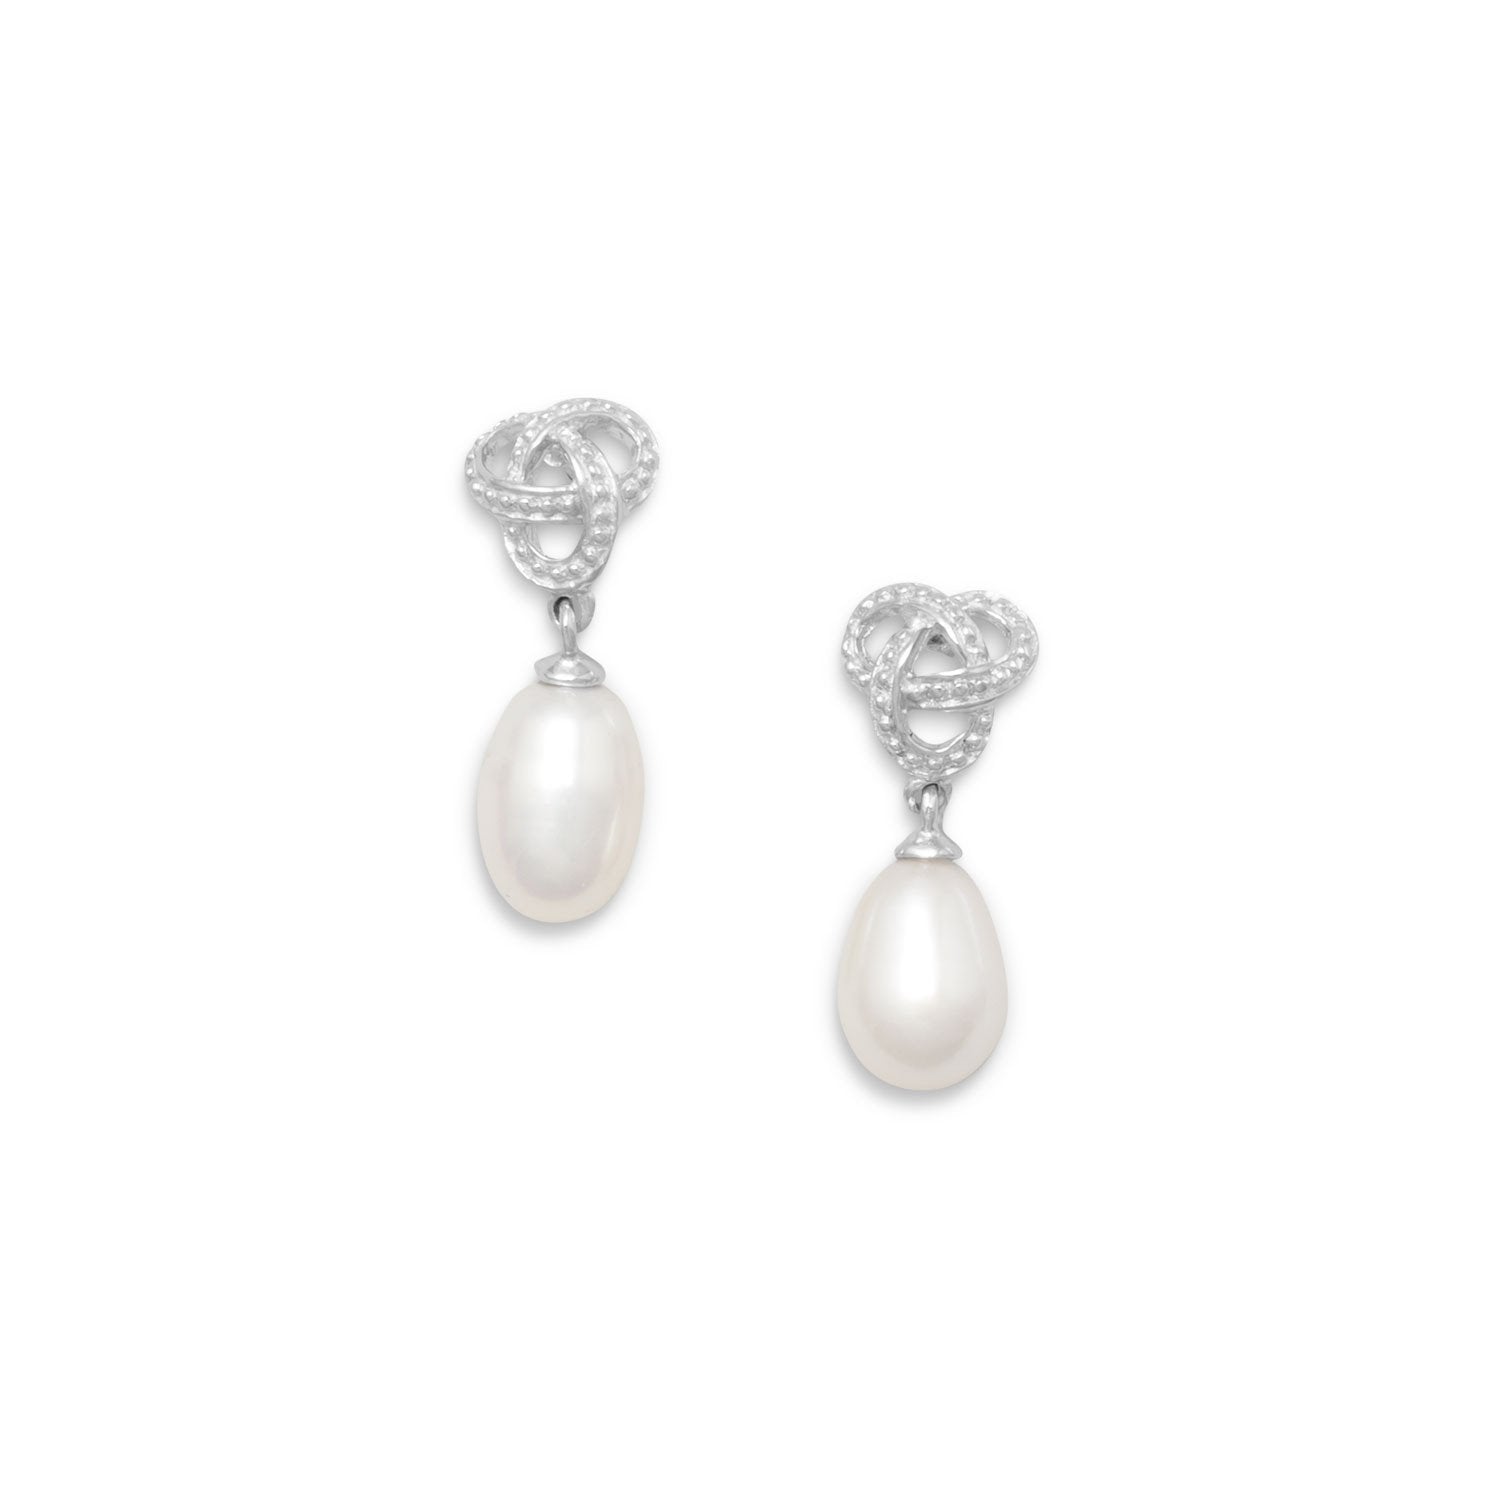 Rhodium Plated Love Knot Earrings with Cultured Freshwater Pearl Drop - Joyeria Lady